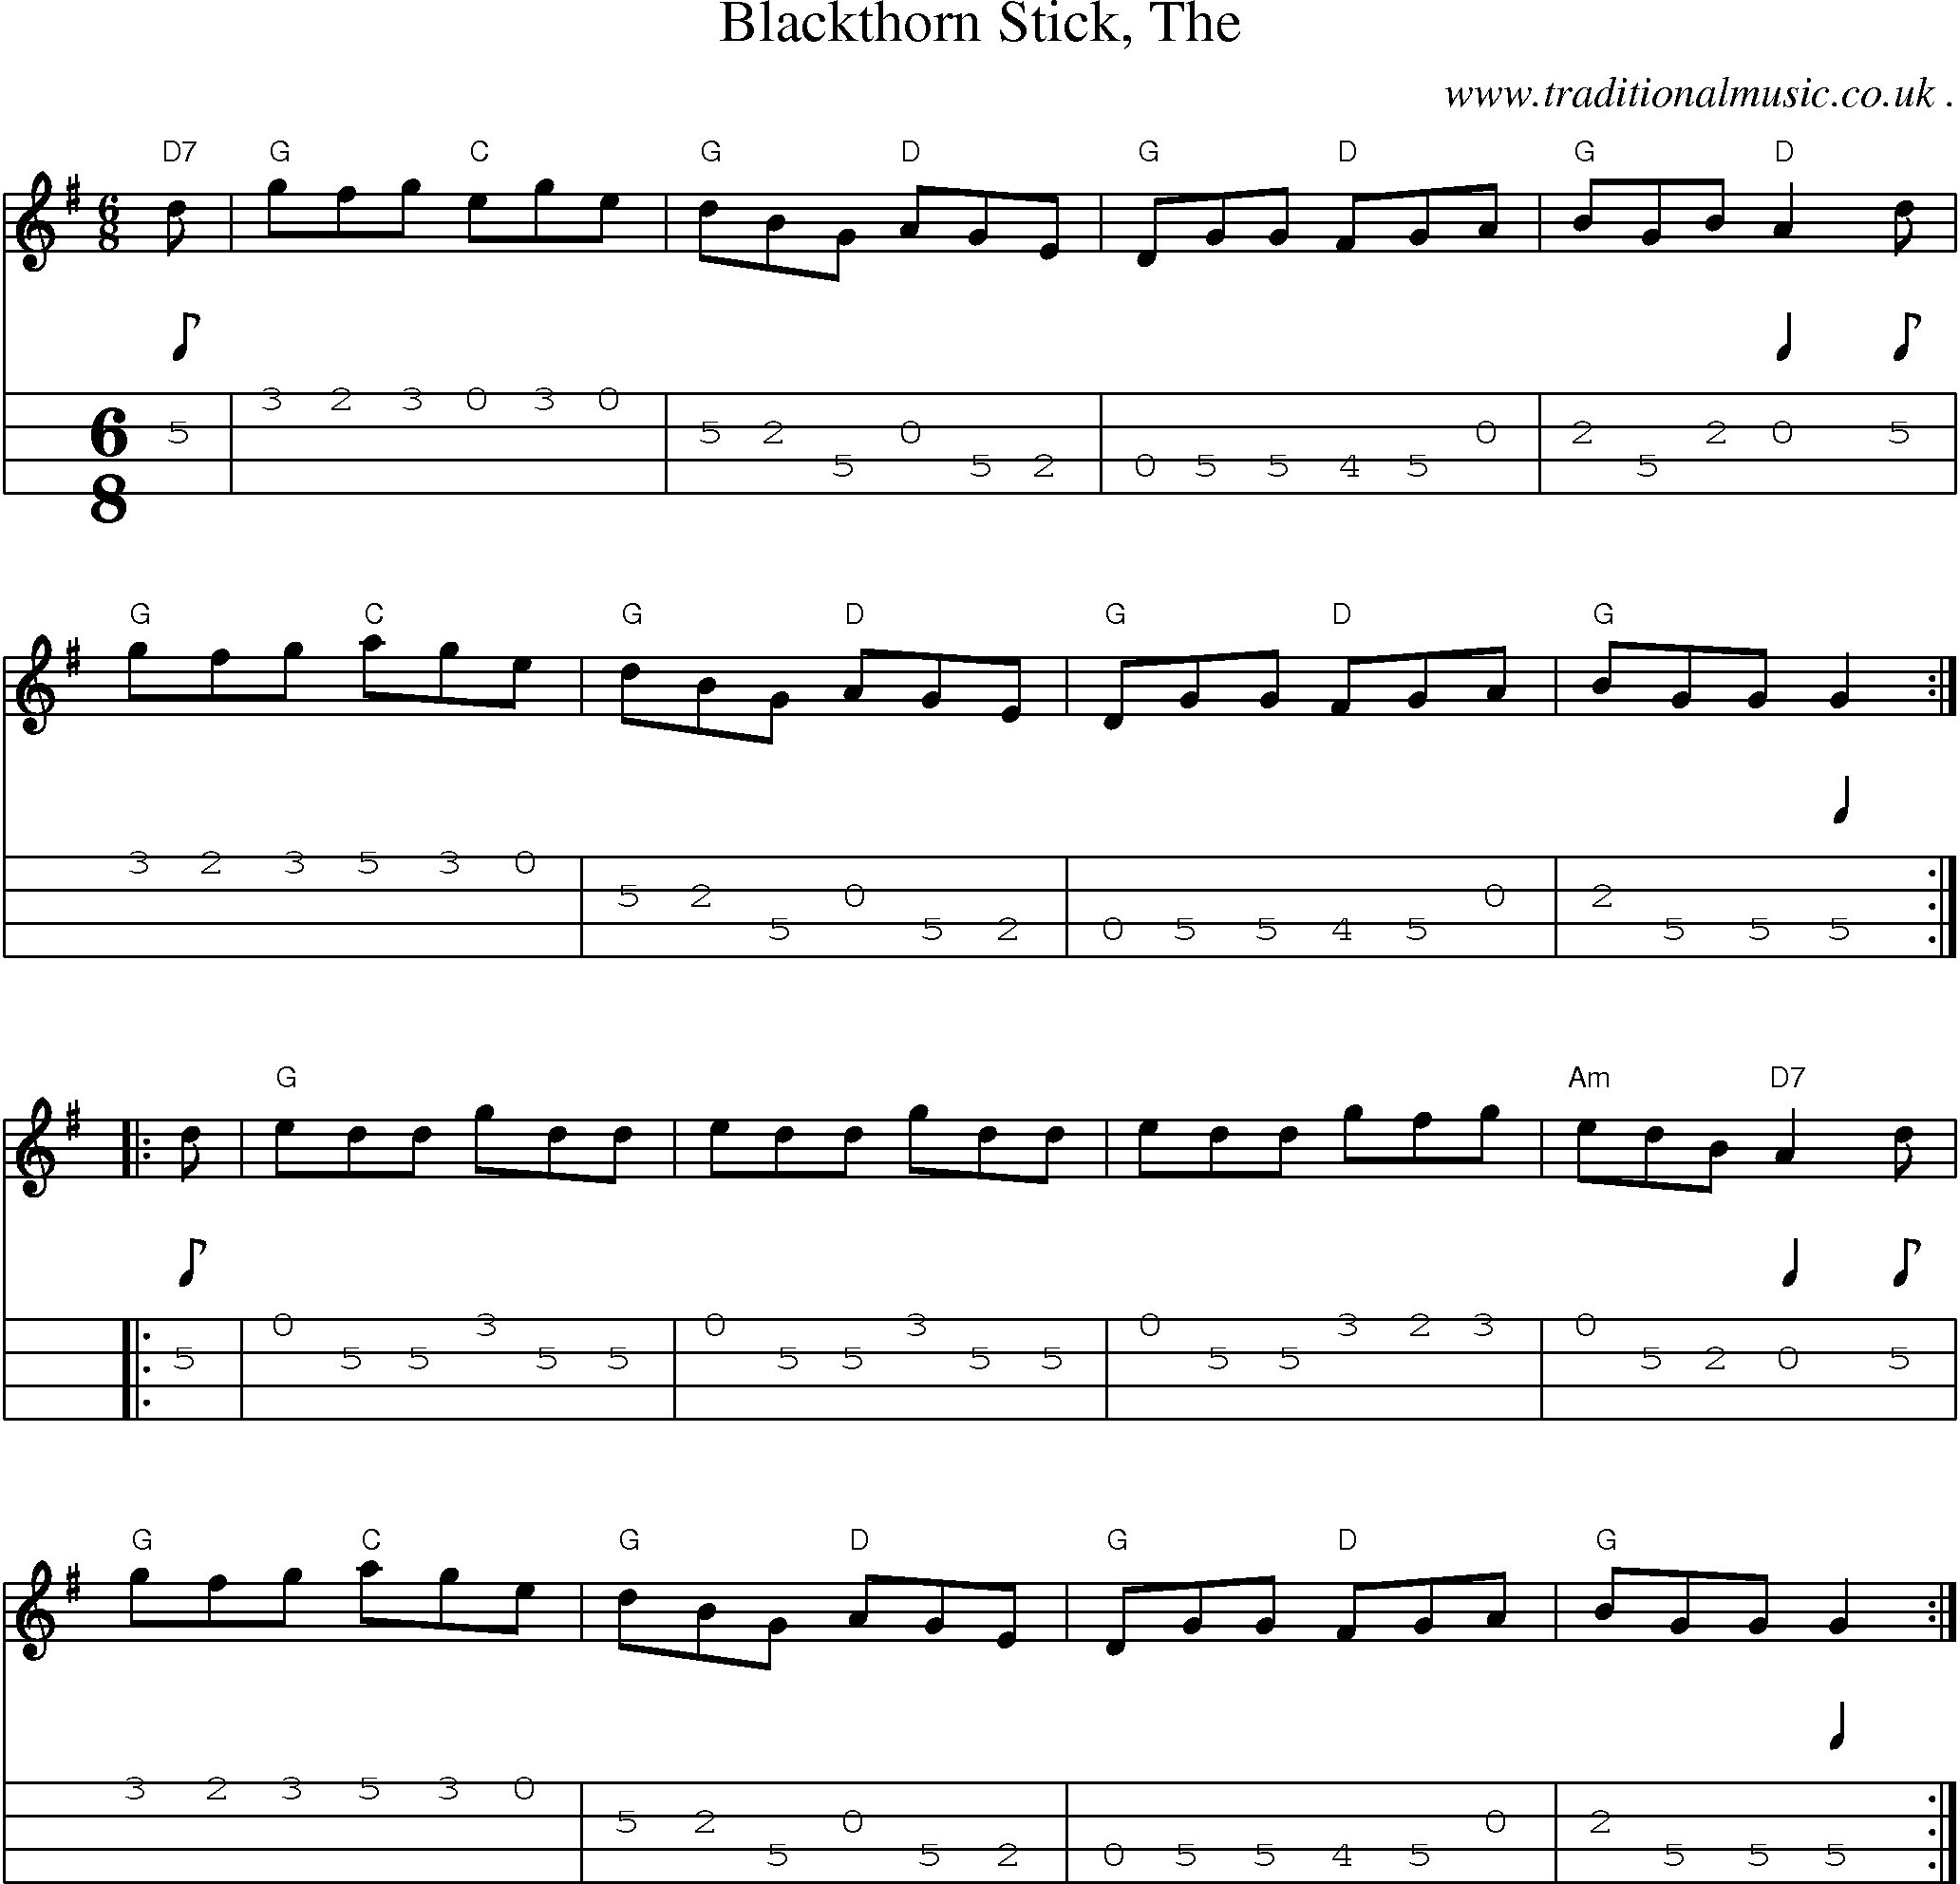 Music Score and Guitar Tabs for Blackthorn Stick The